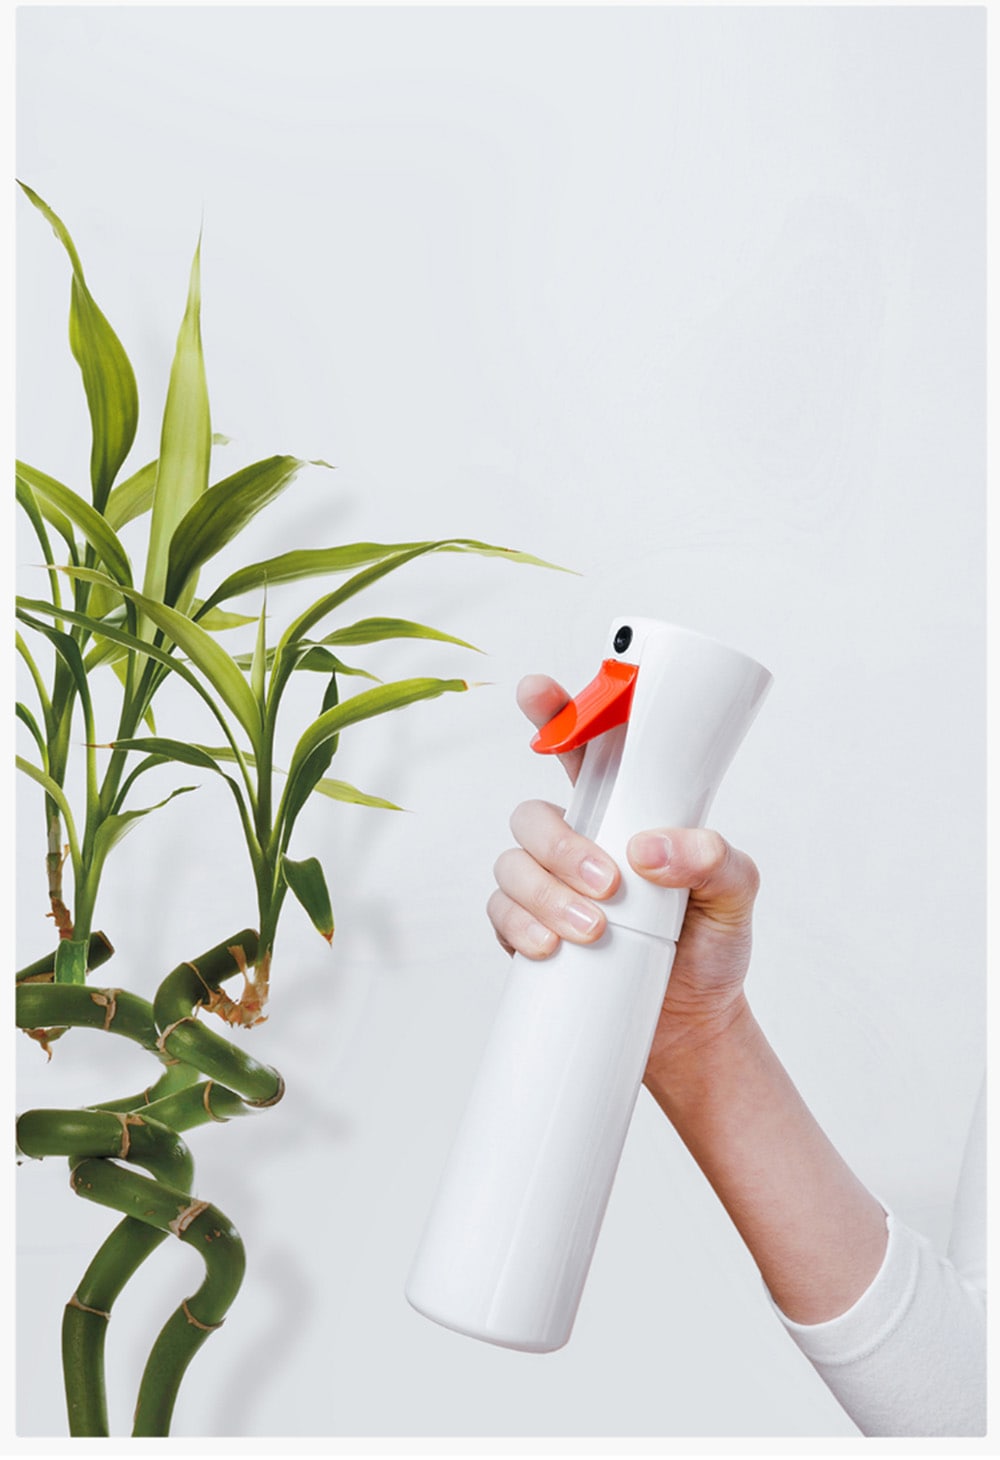 YG - 01 Time Delay Spray Bottle from Xiaomi Youpin- Milk White